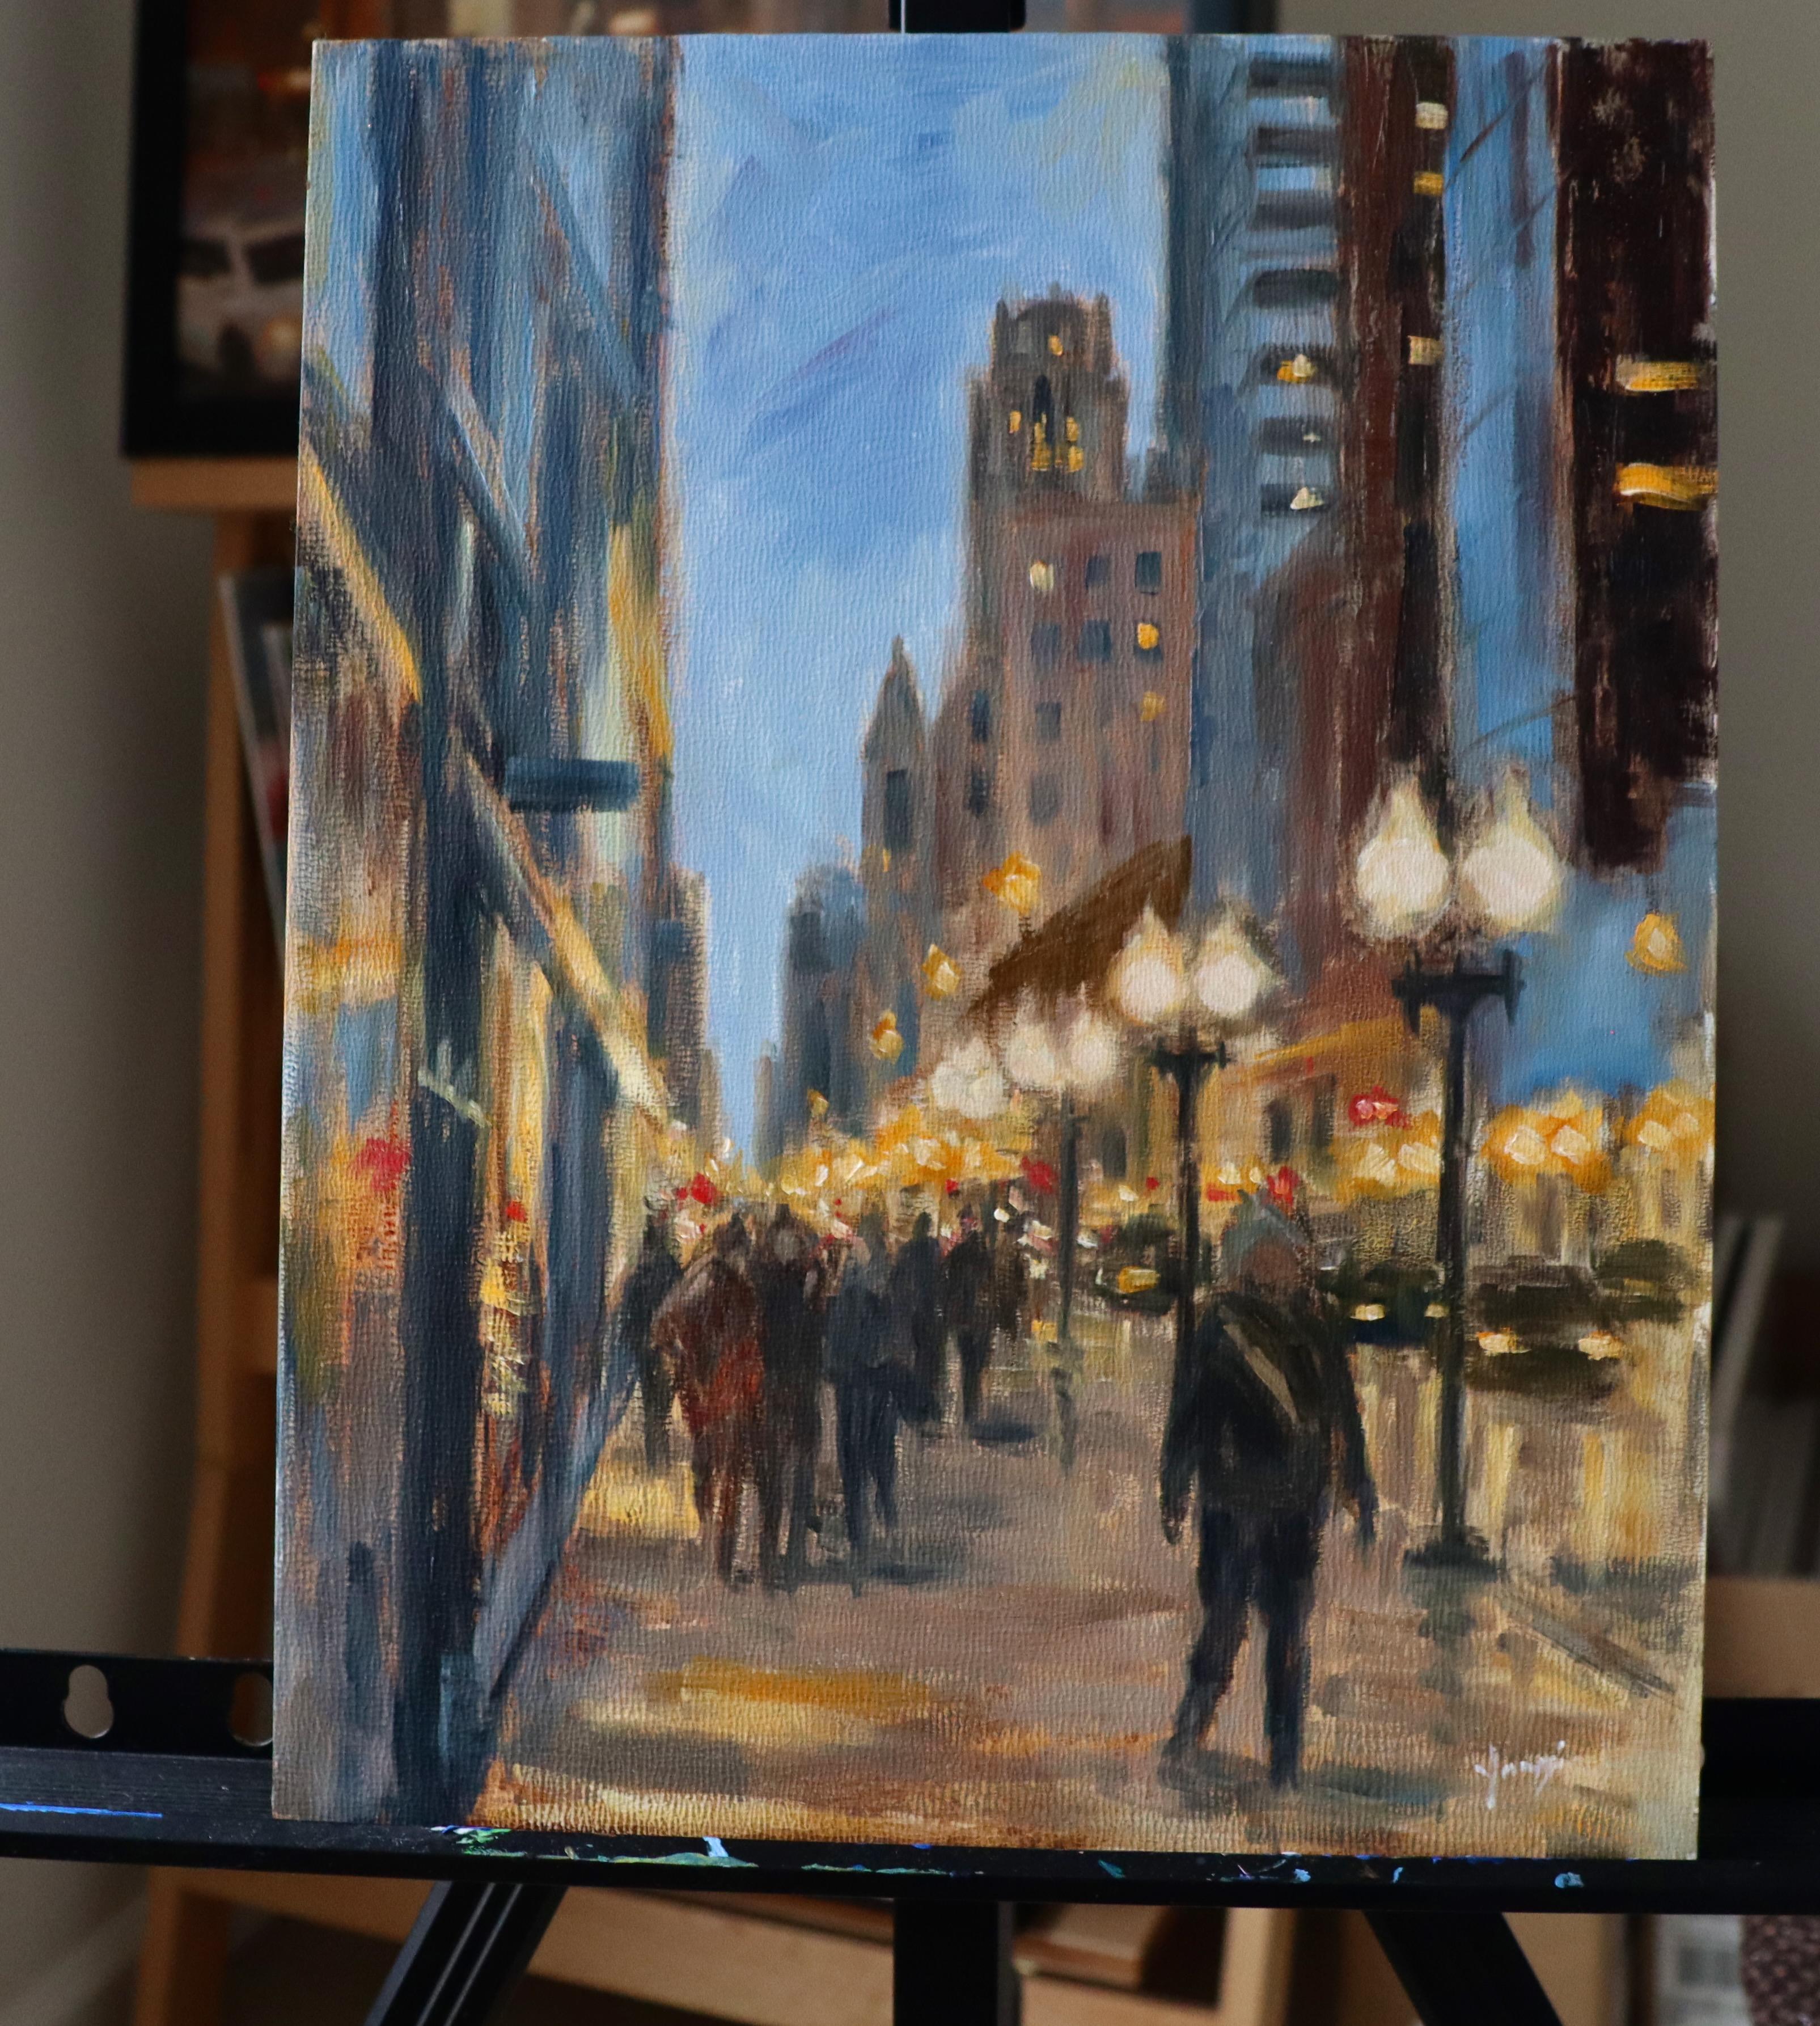 <p>Artist Comments<br>As the evening falls, Michigan Avenue in Chicago bustles with activity as pedestrians stroll down the sidewalk. The iconic lampposts of The Magnificent Mile cast a warm, inviting glow along the street, while buildings on either